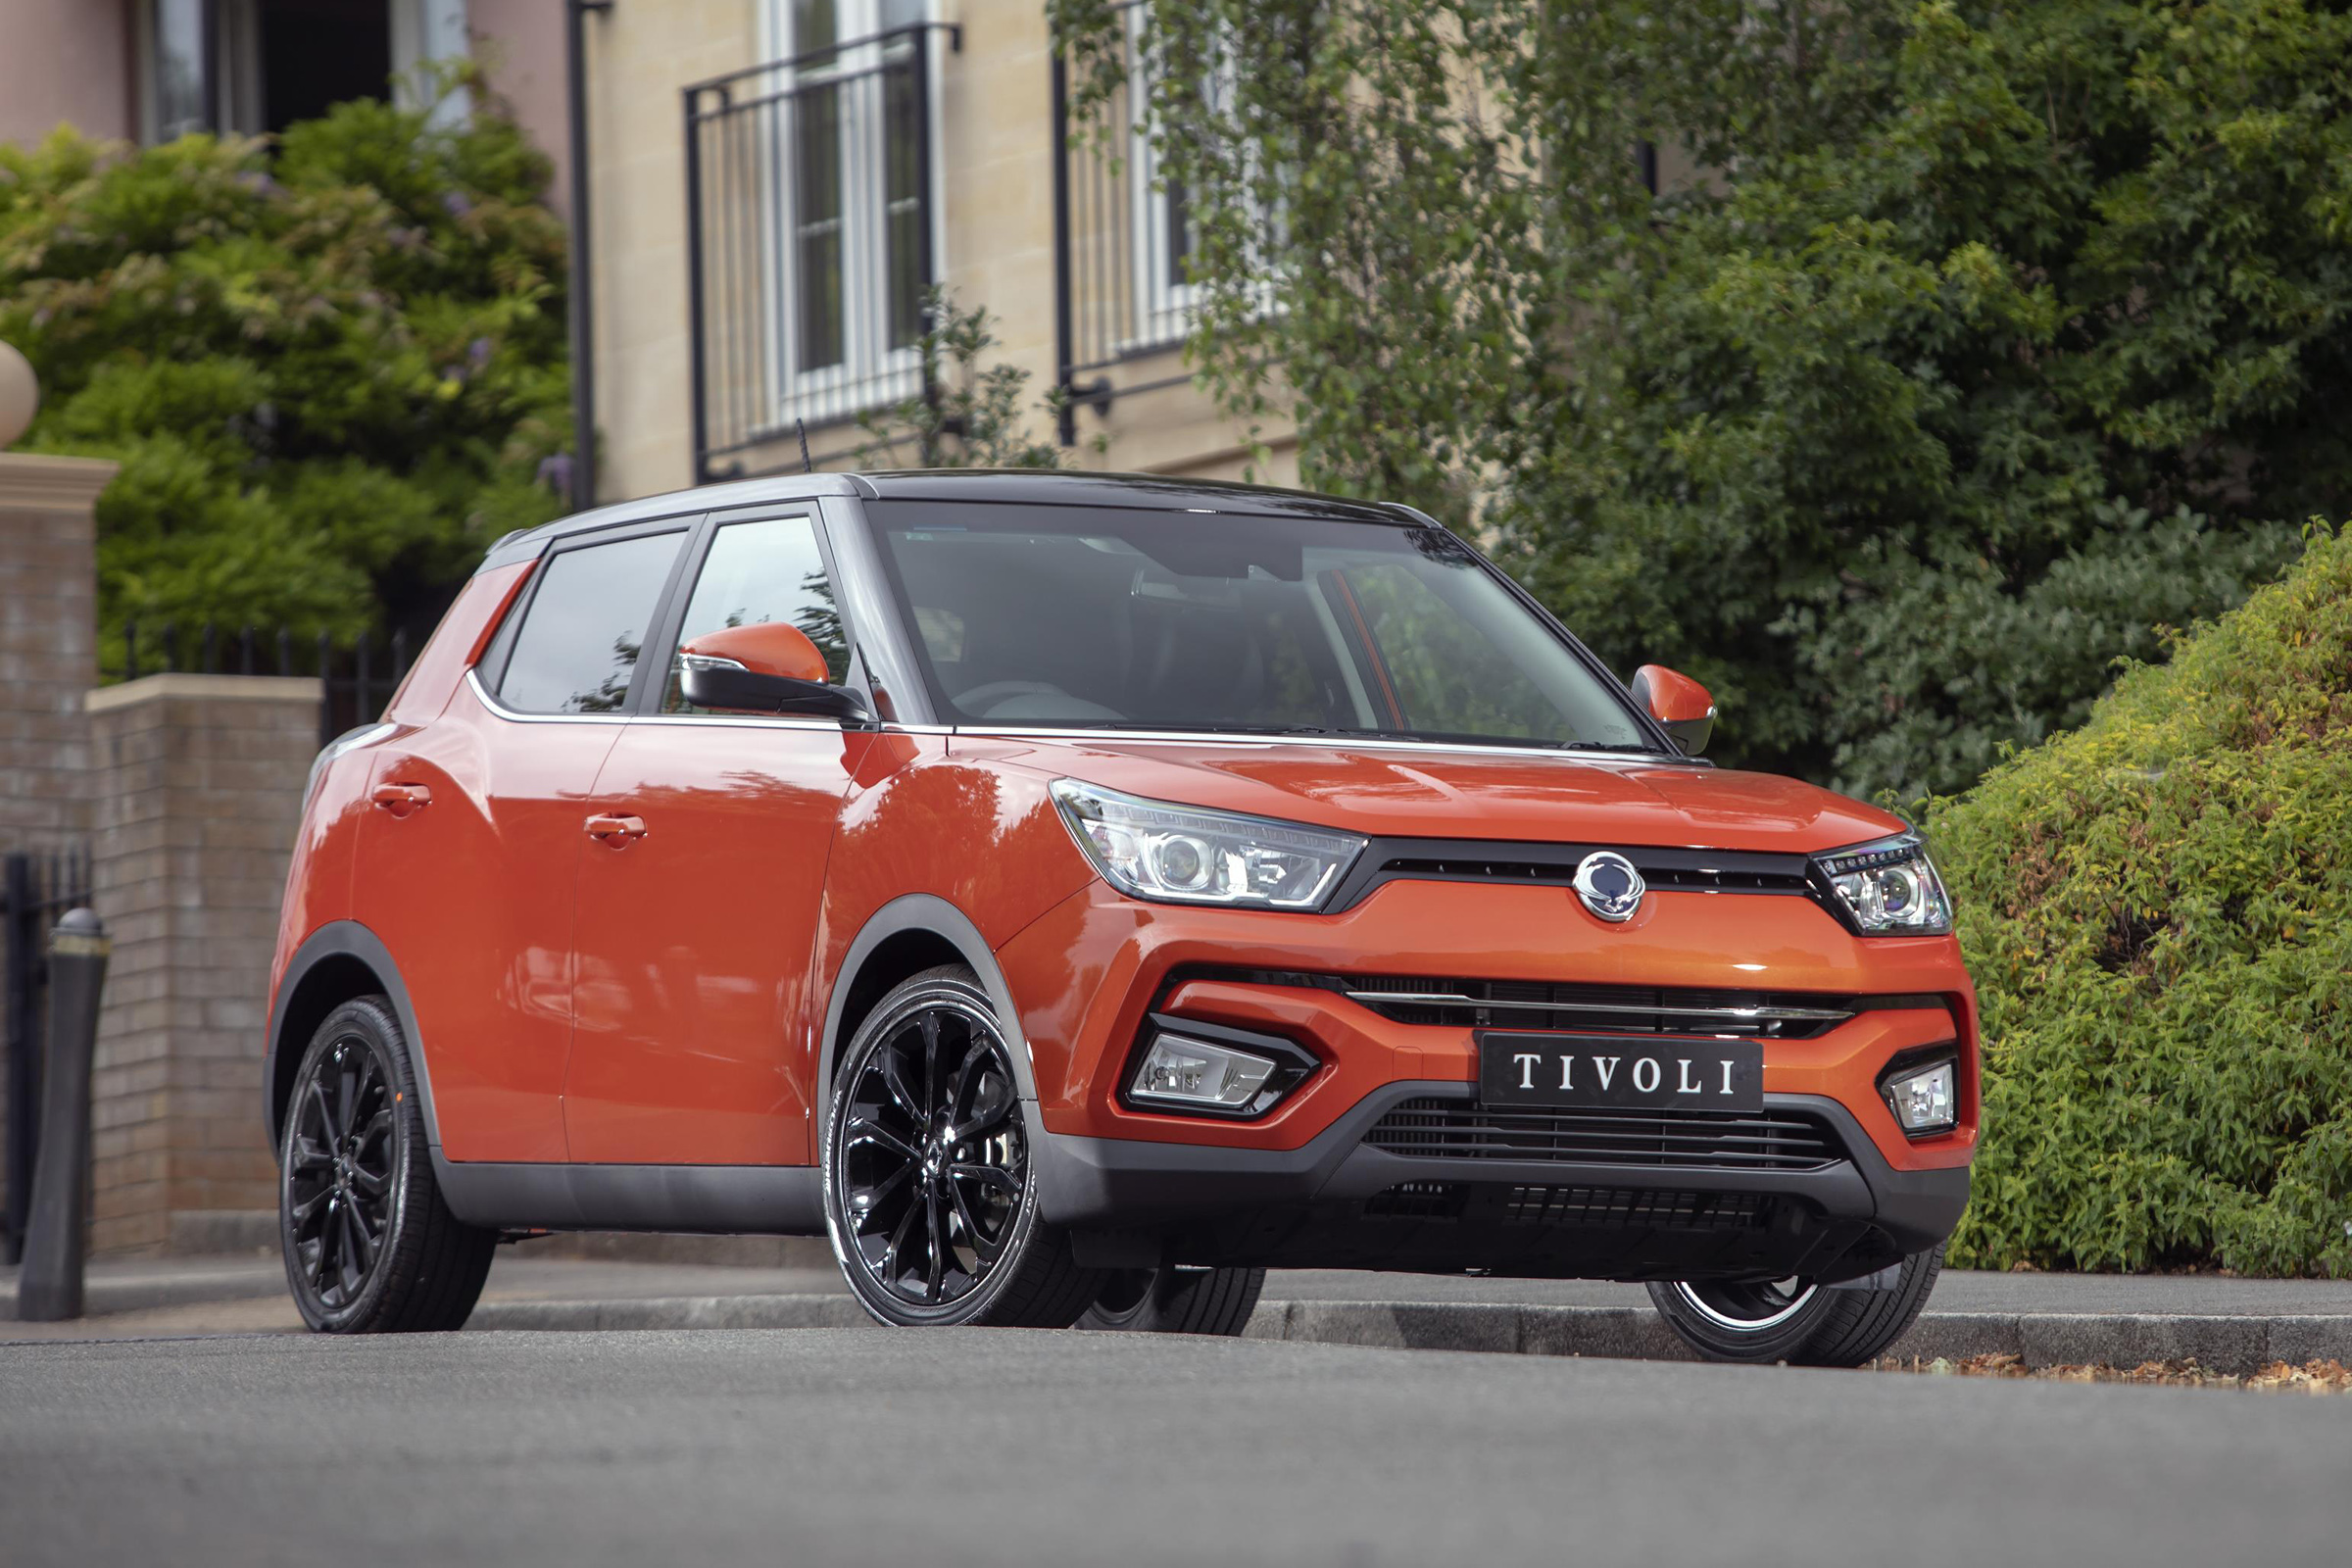 SsangYong Tivoli LE special-edition trim level launched | Carbuyer